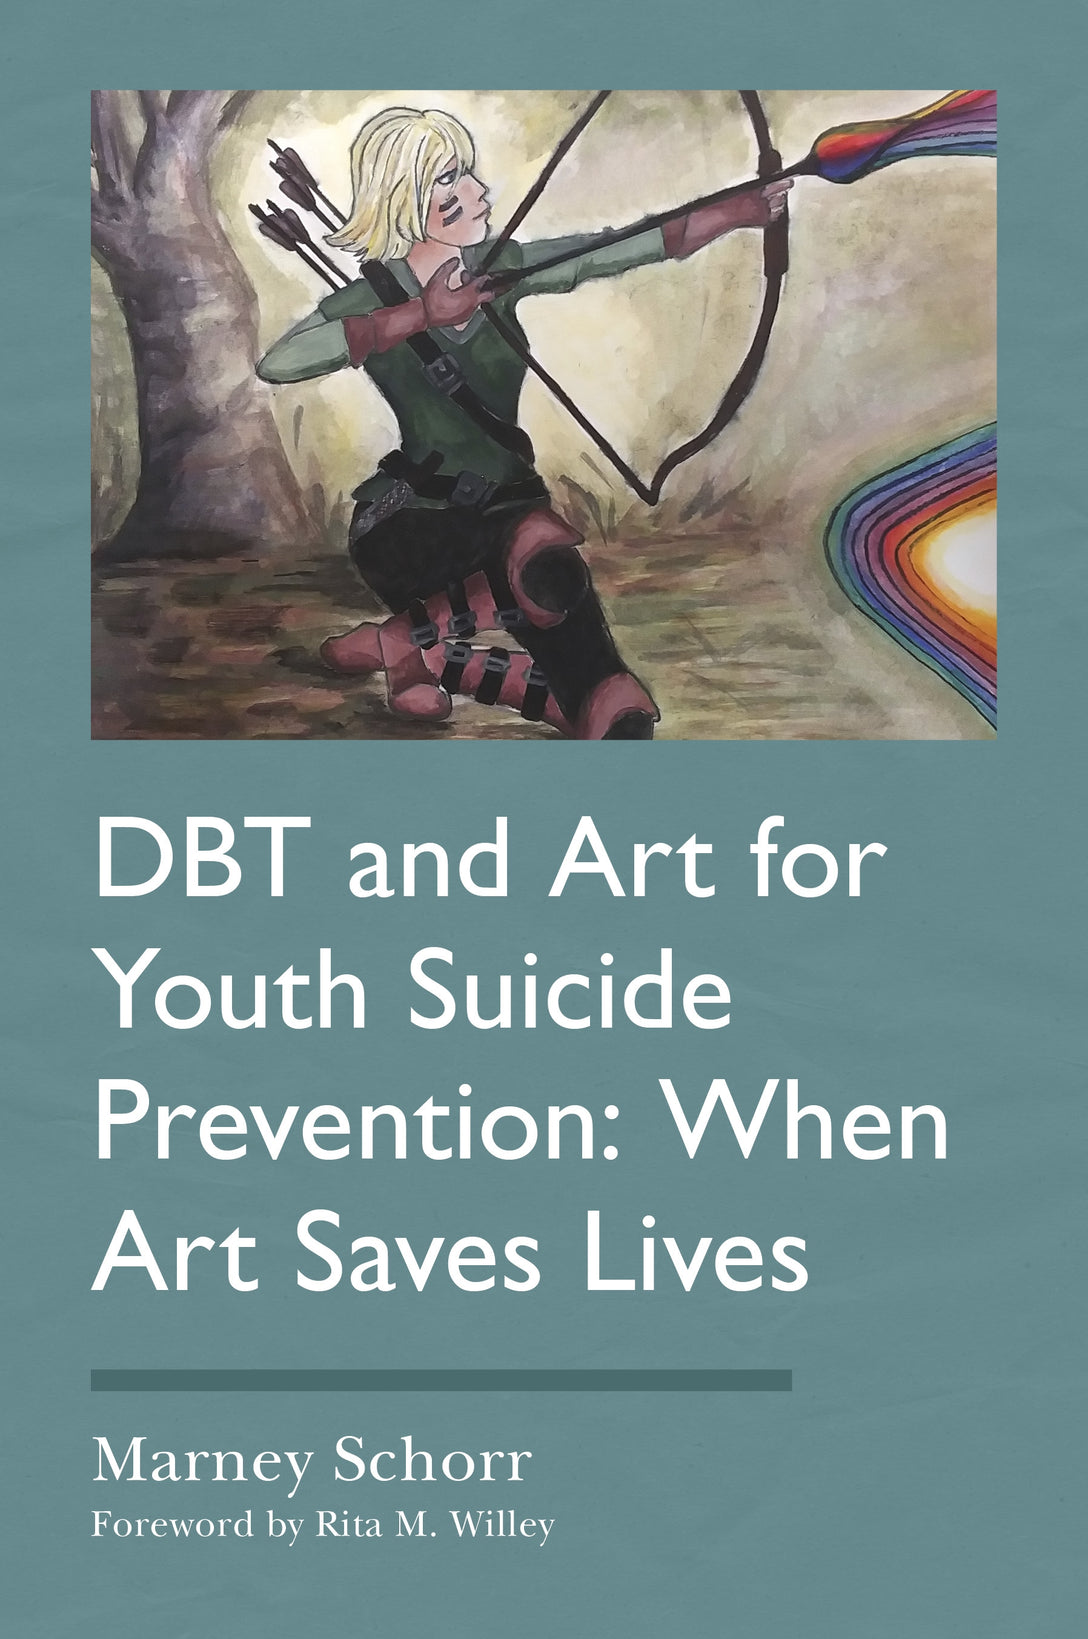 DBT and Art for Youth Suicide Prevention by Marney Schorr, Rita M. Willey